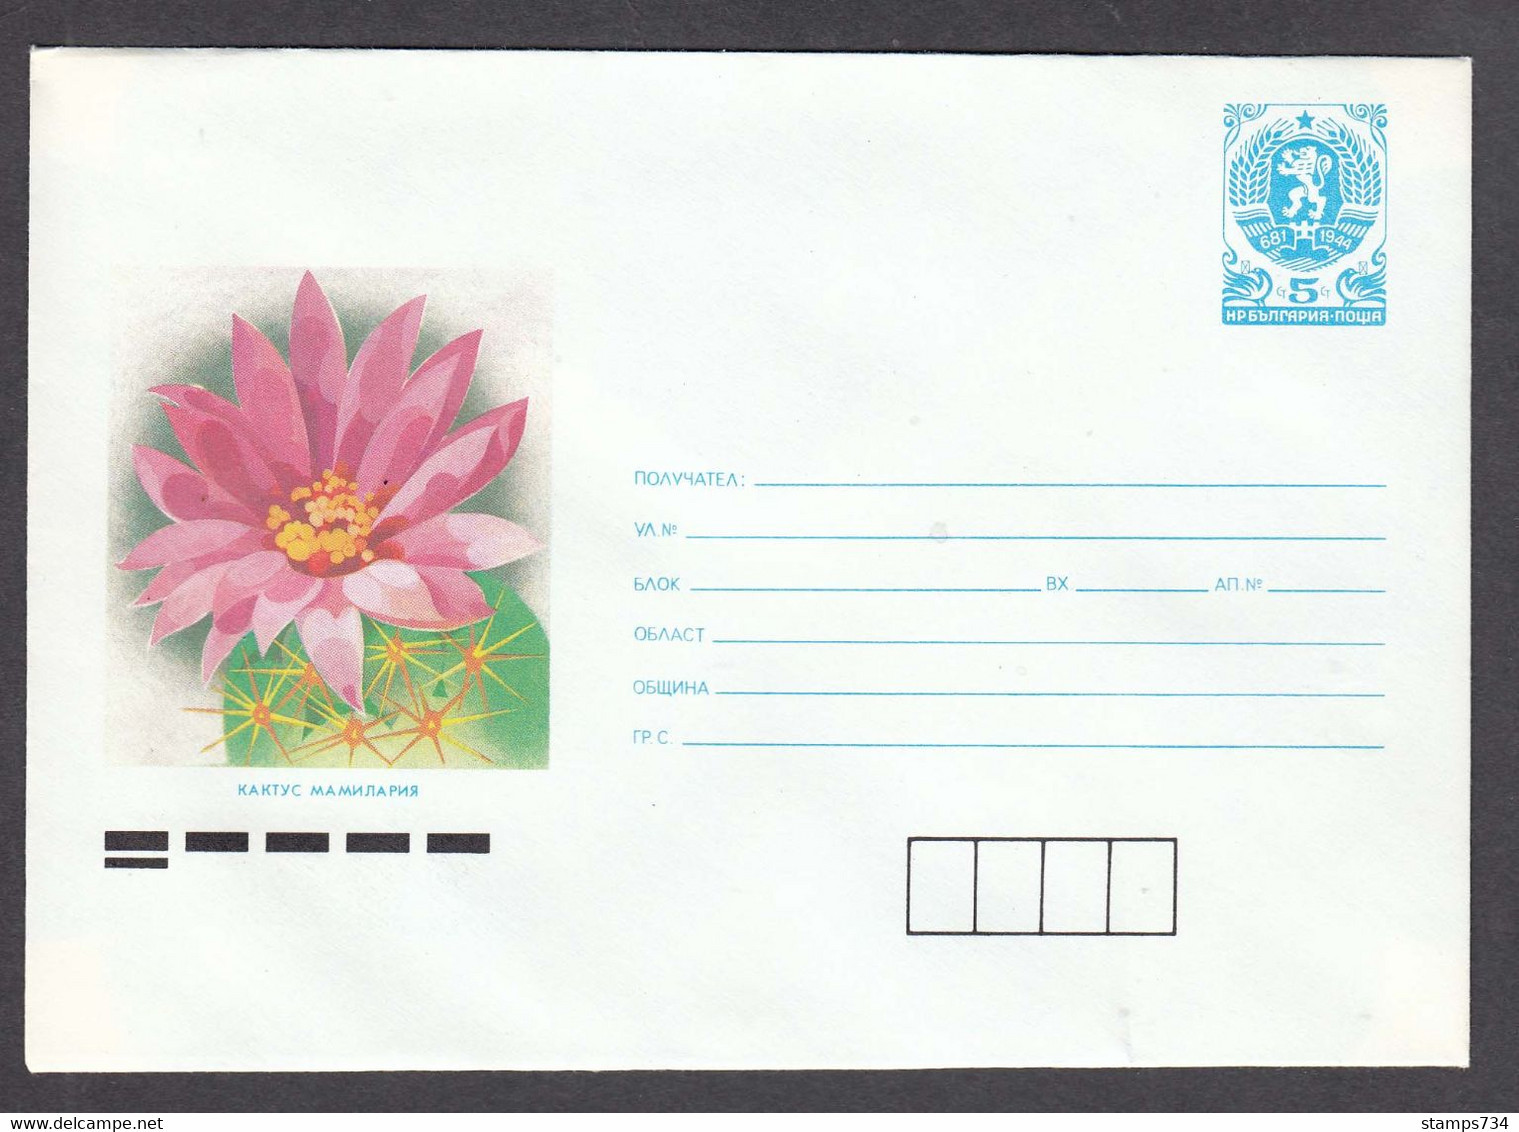 PS 959/1989 - Mint, Flower: Cactus Mamilaria, Post. Stationery - Bulgaria - Omslagen